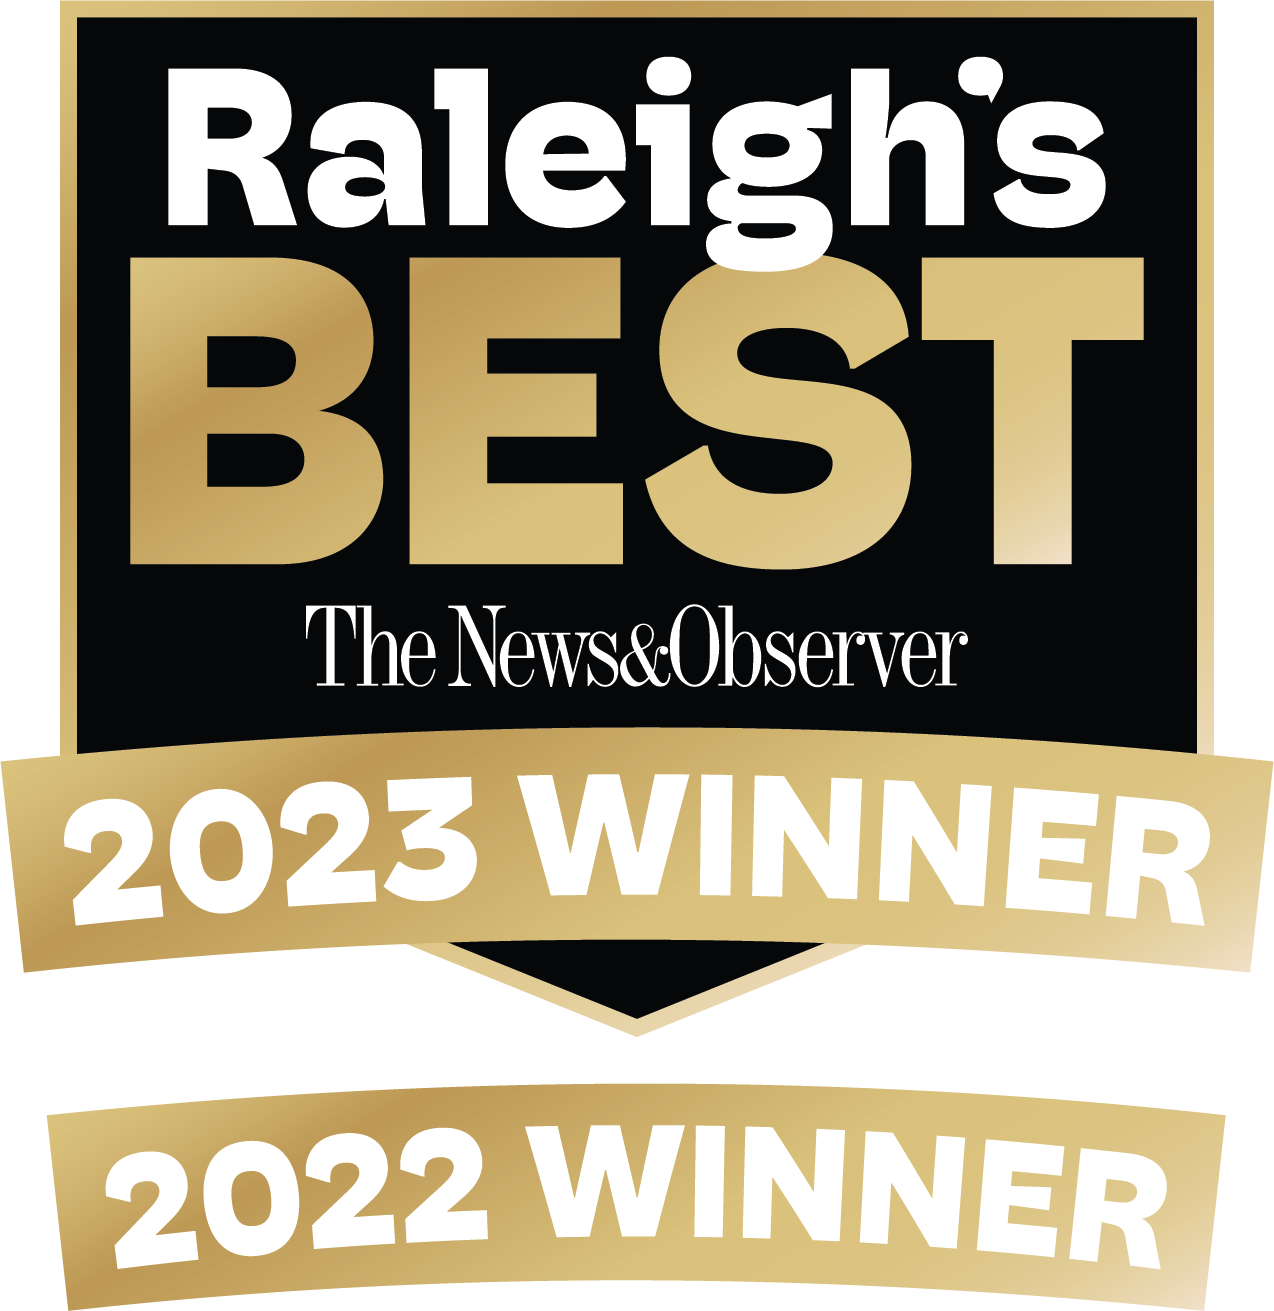 We won the Raleigh's Best Award for both 2022 and 2023!